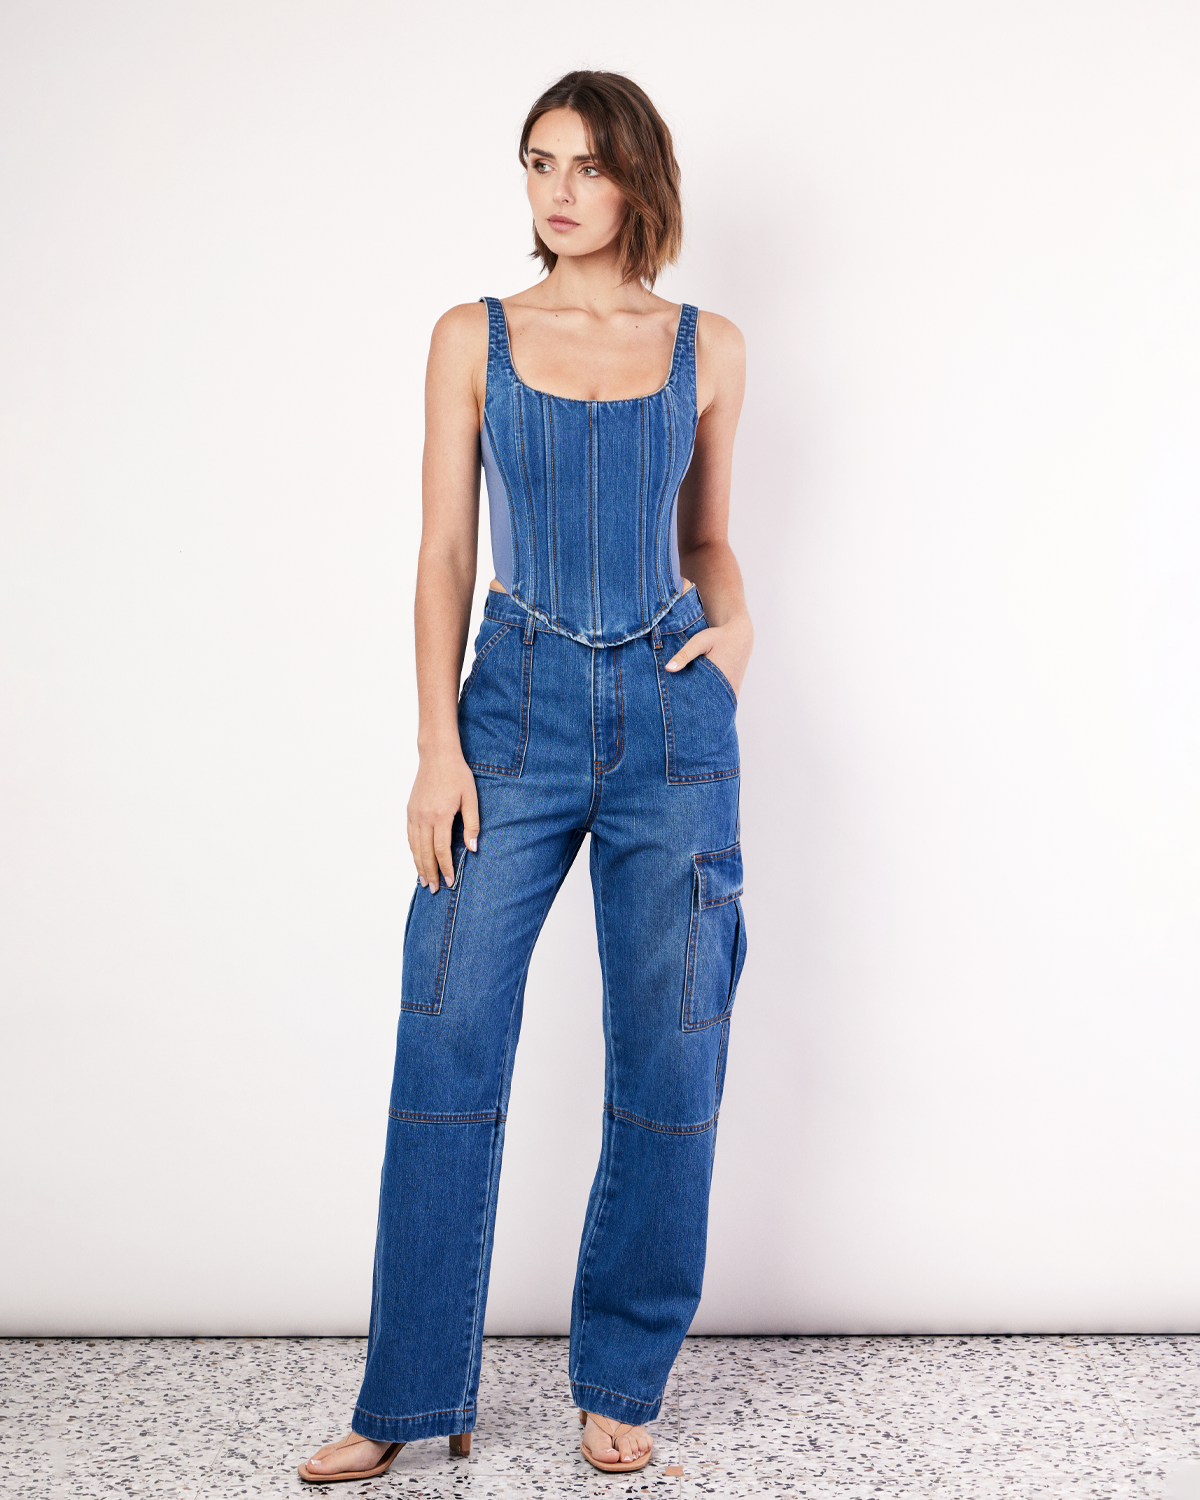 The Denim Bustier is a structured top, featuring adjustable straps, boning detail through the front, a zip closure and dipped waist to flatter your waistline. The side panels are made from scuba fabric that mould to the body and hug you in. Now available at Romy.